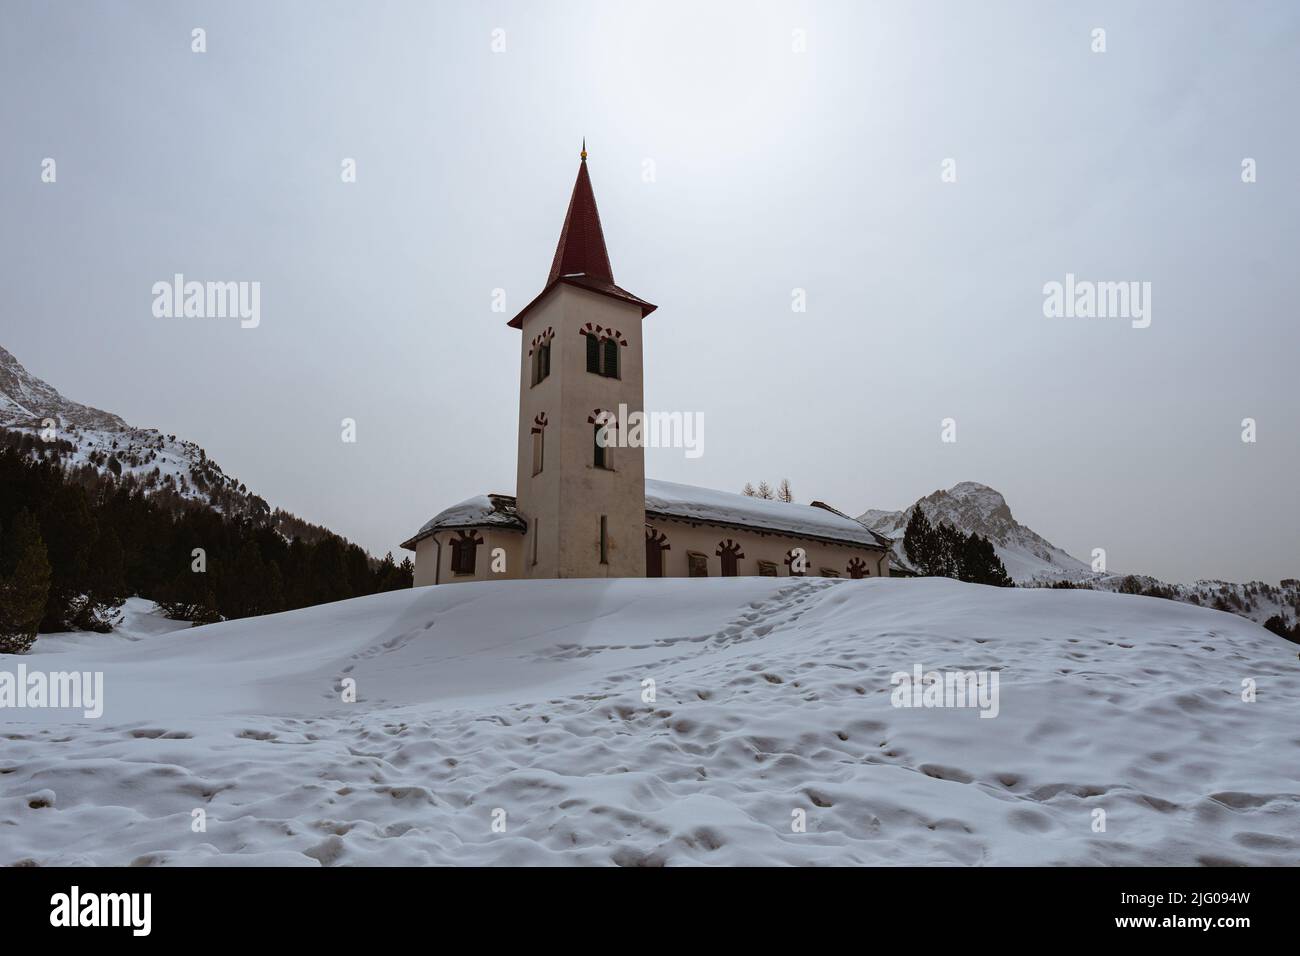 The white church, in the village of maloja, covered by snow during a late winter day, Switzerland - March 2022. Stock Photo